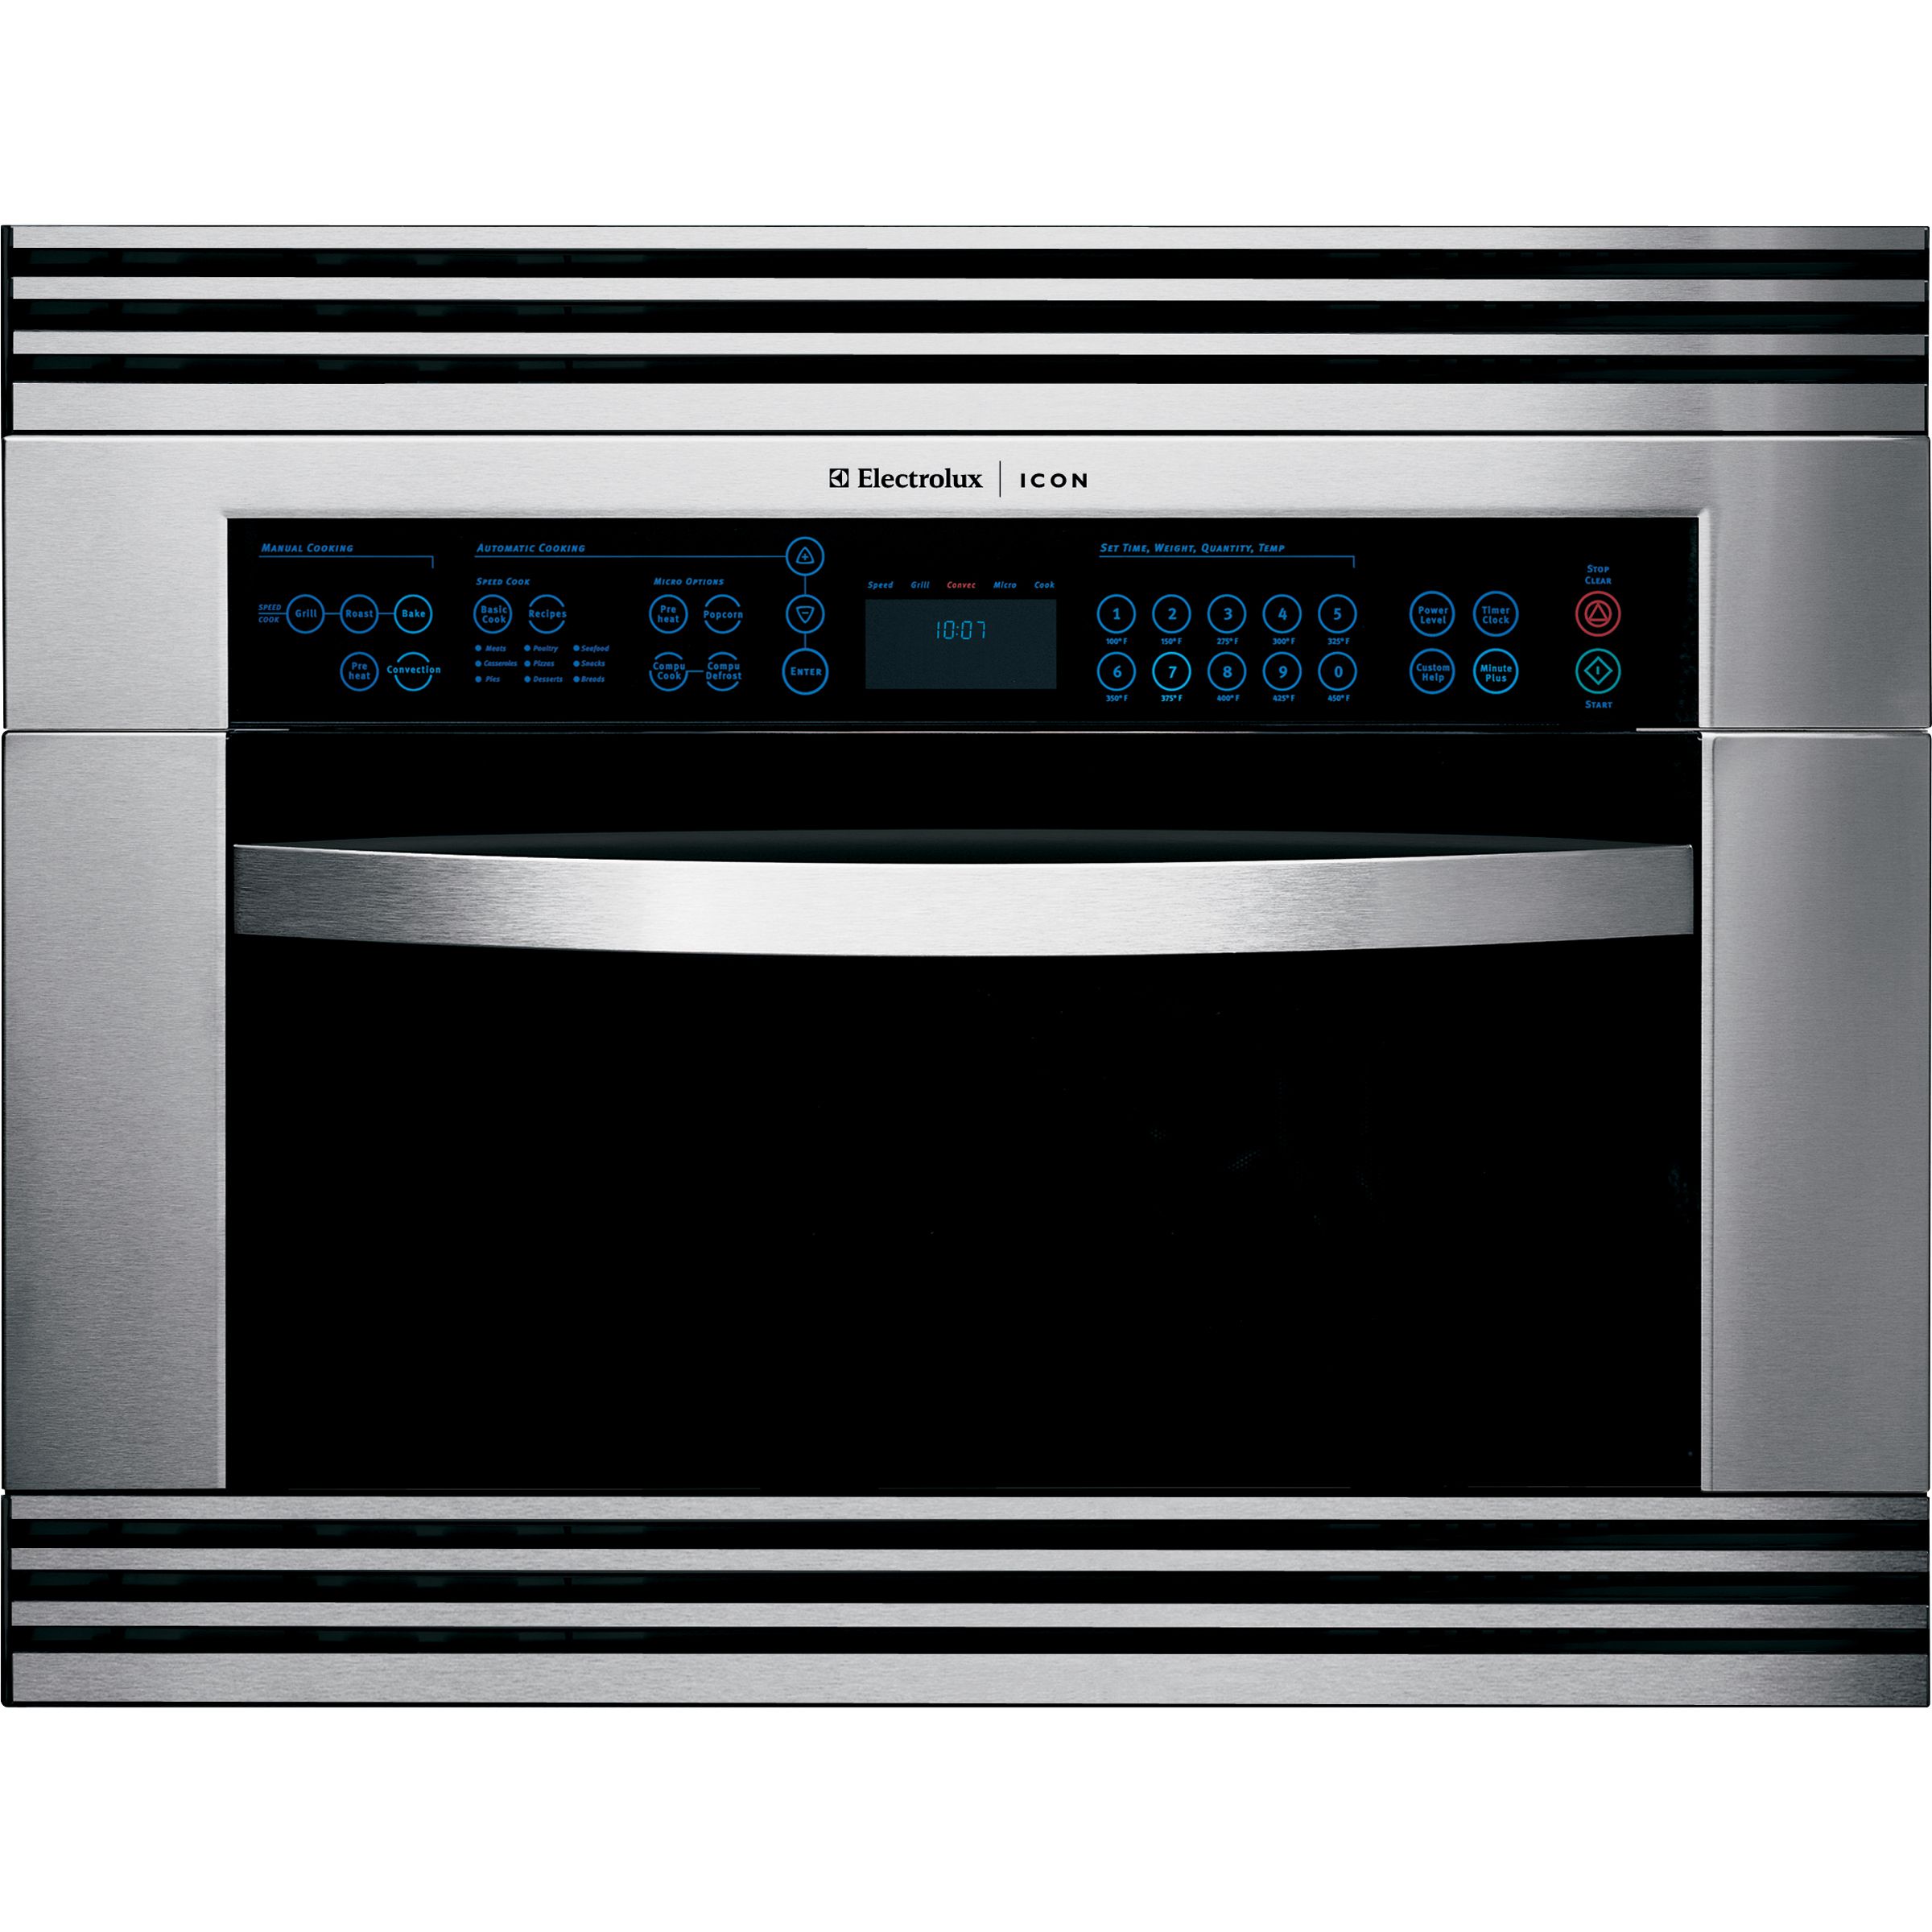 Electrolux ICON 1.5 cu. ft. Built-In Microwave Oven - Stainless Steel